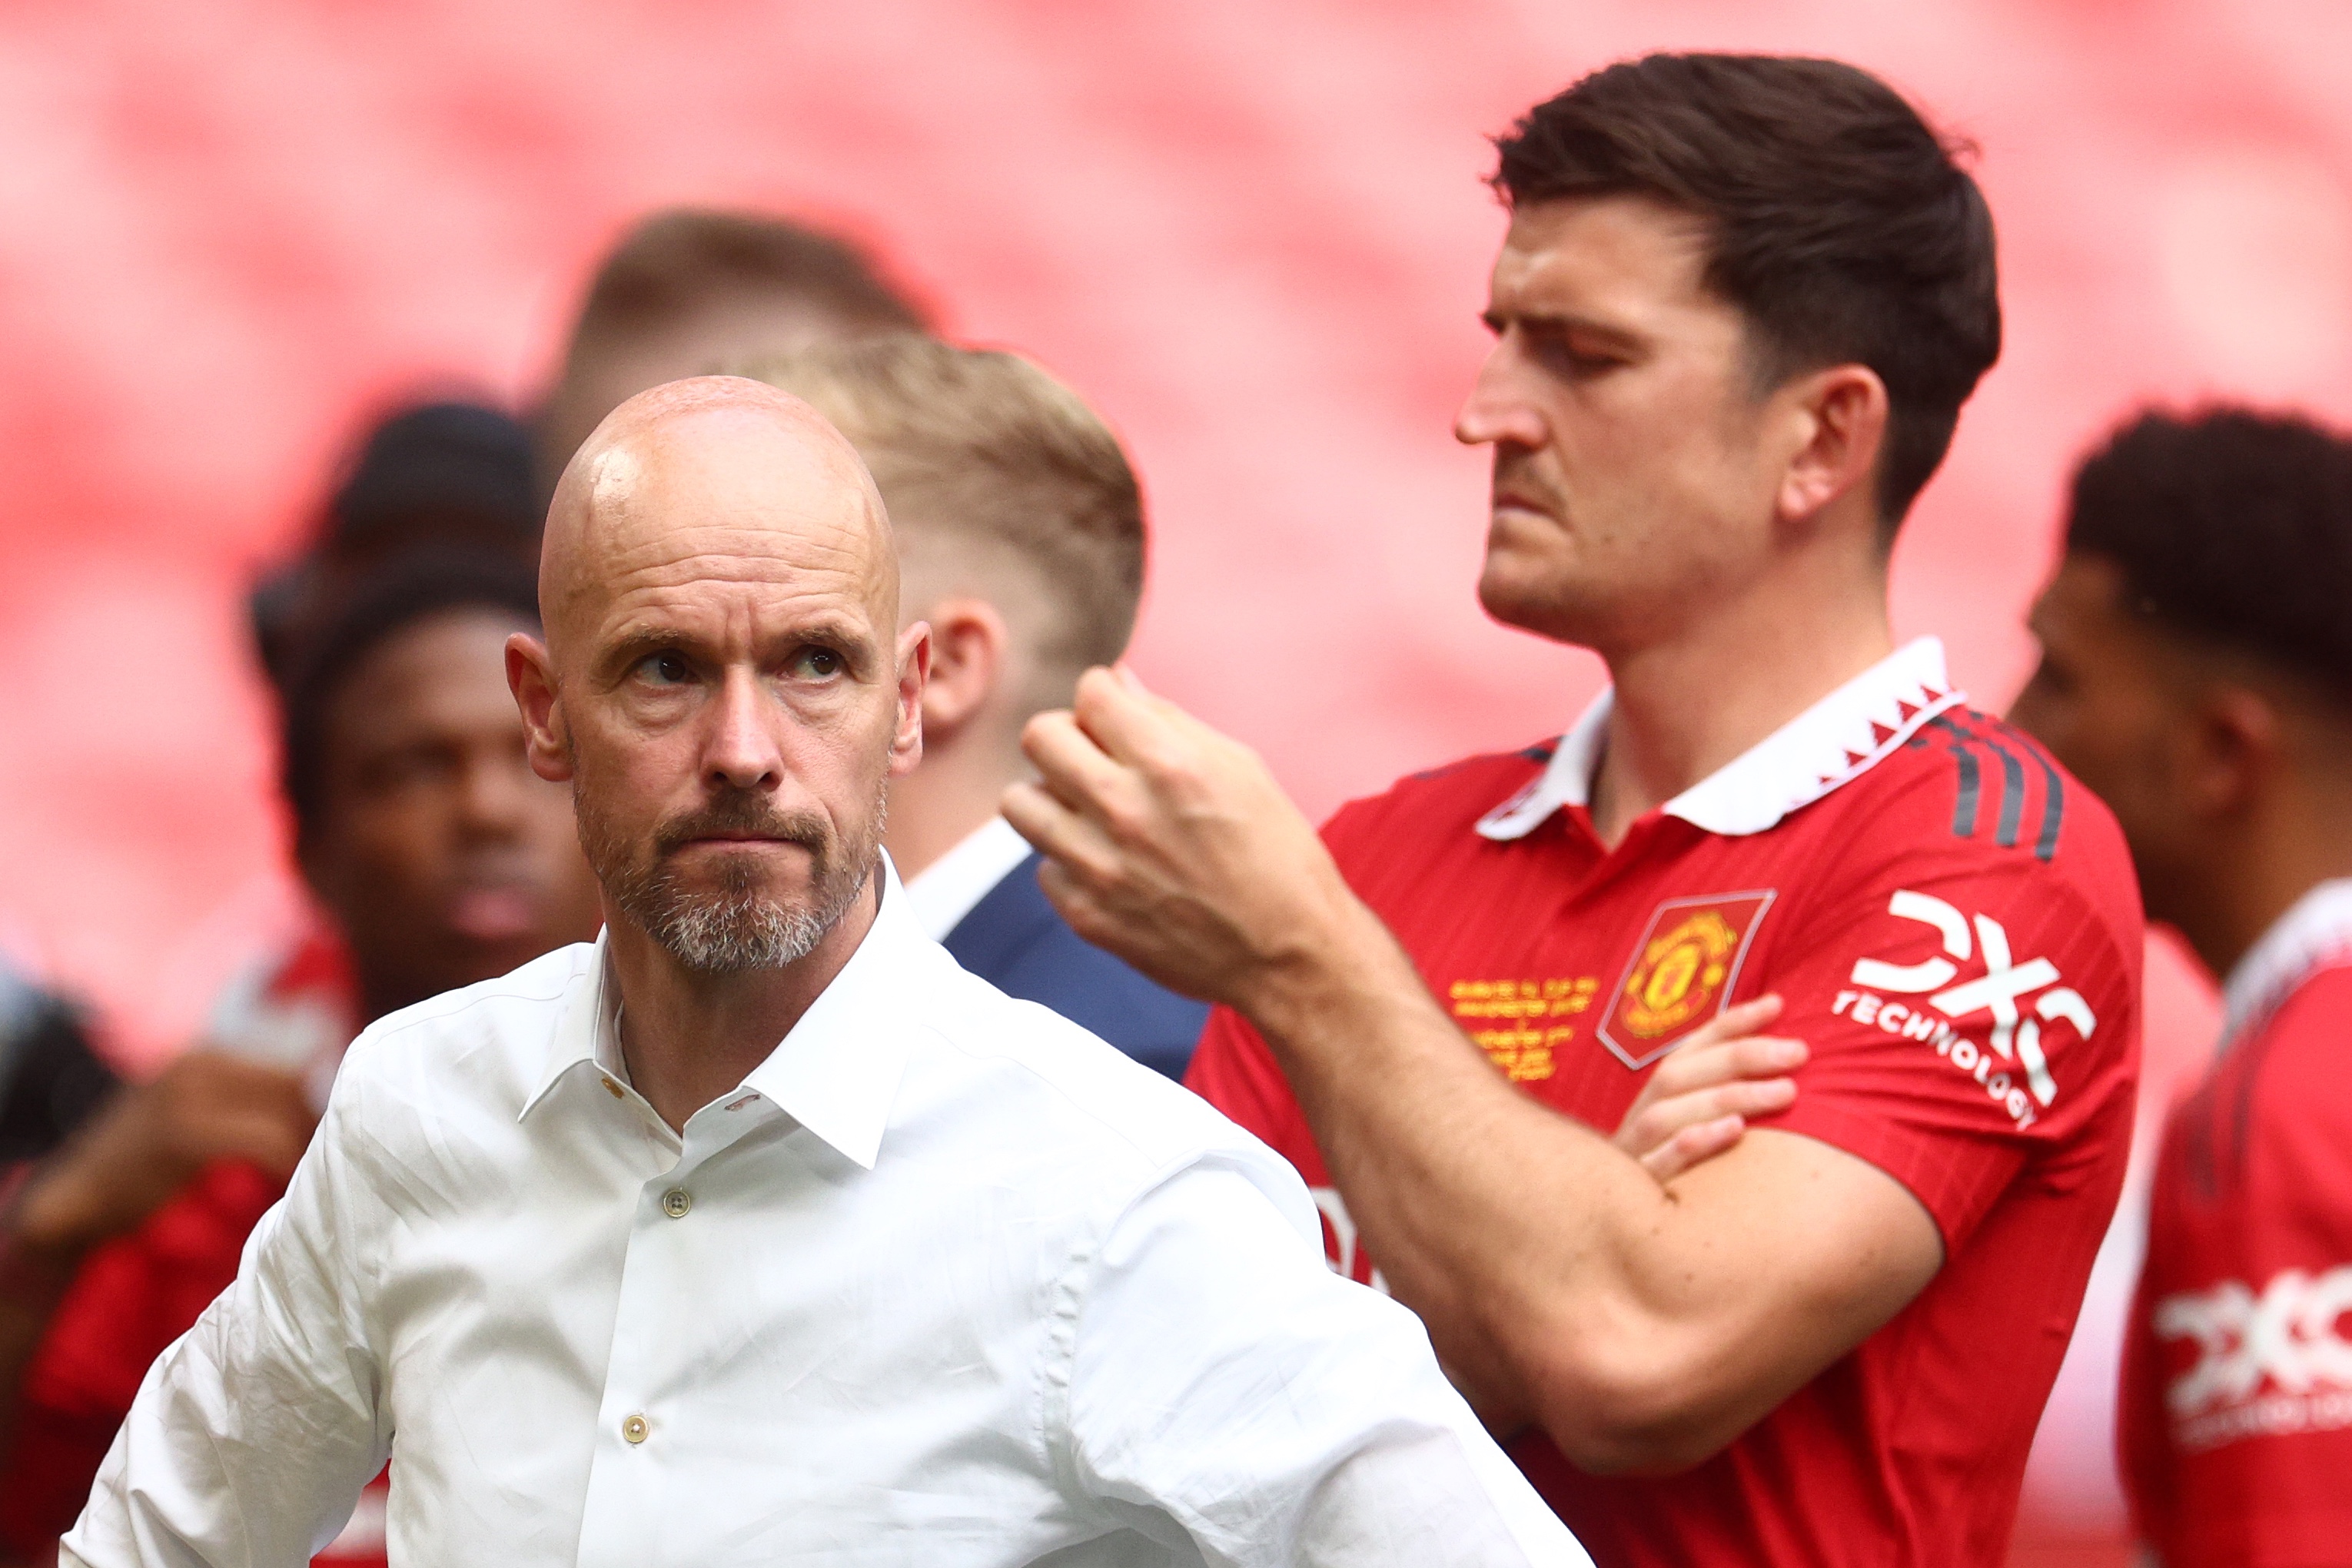 Erik ten Hag is happy that Harry Maguire is staying at Man United